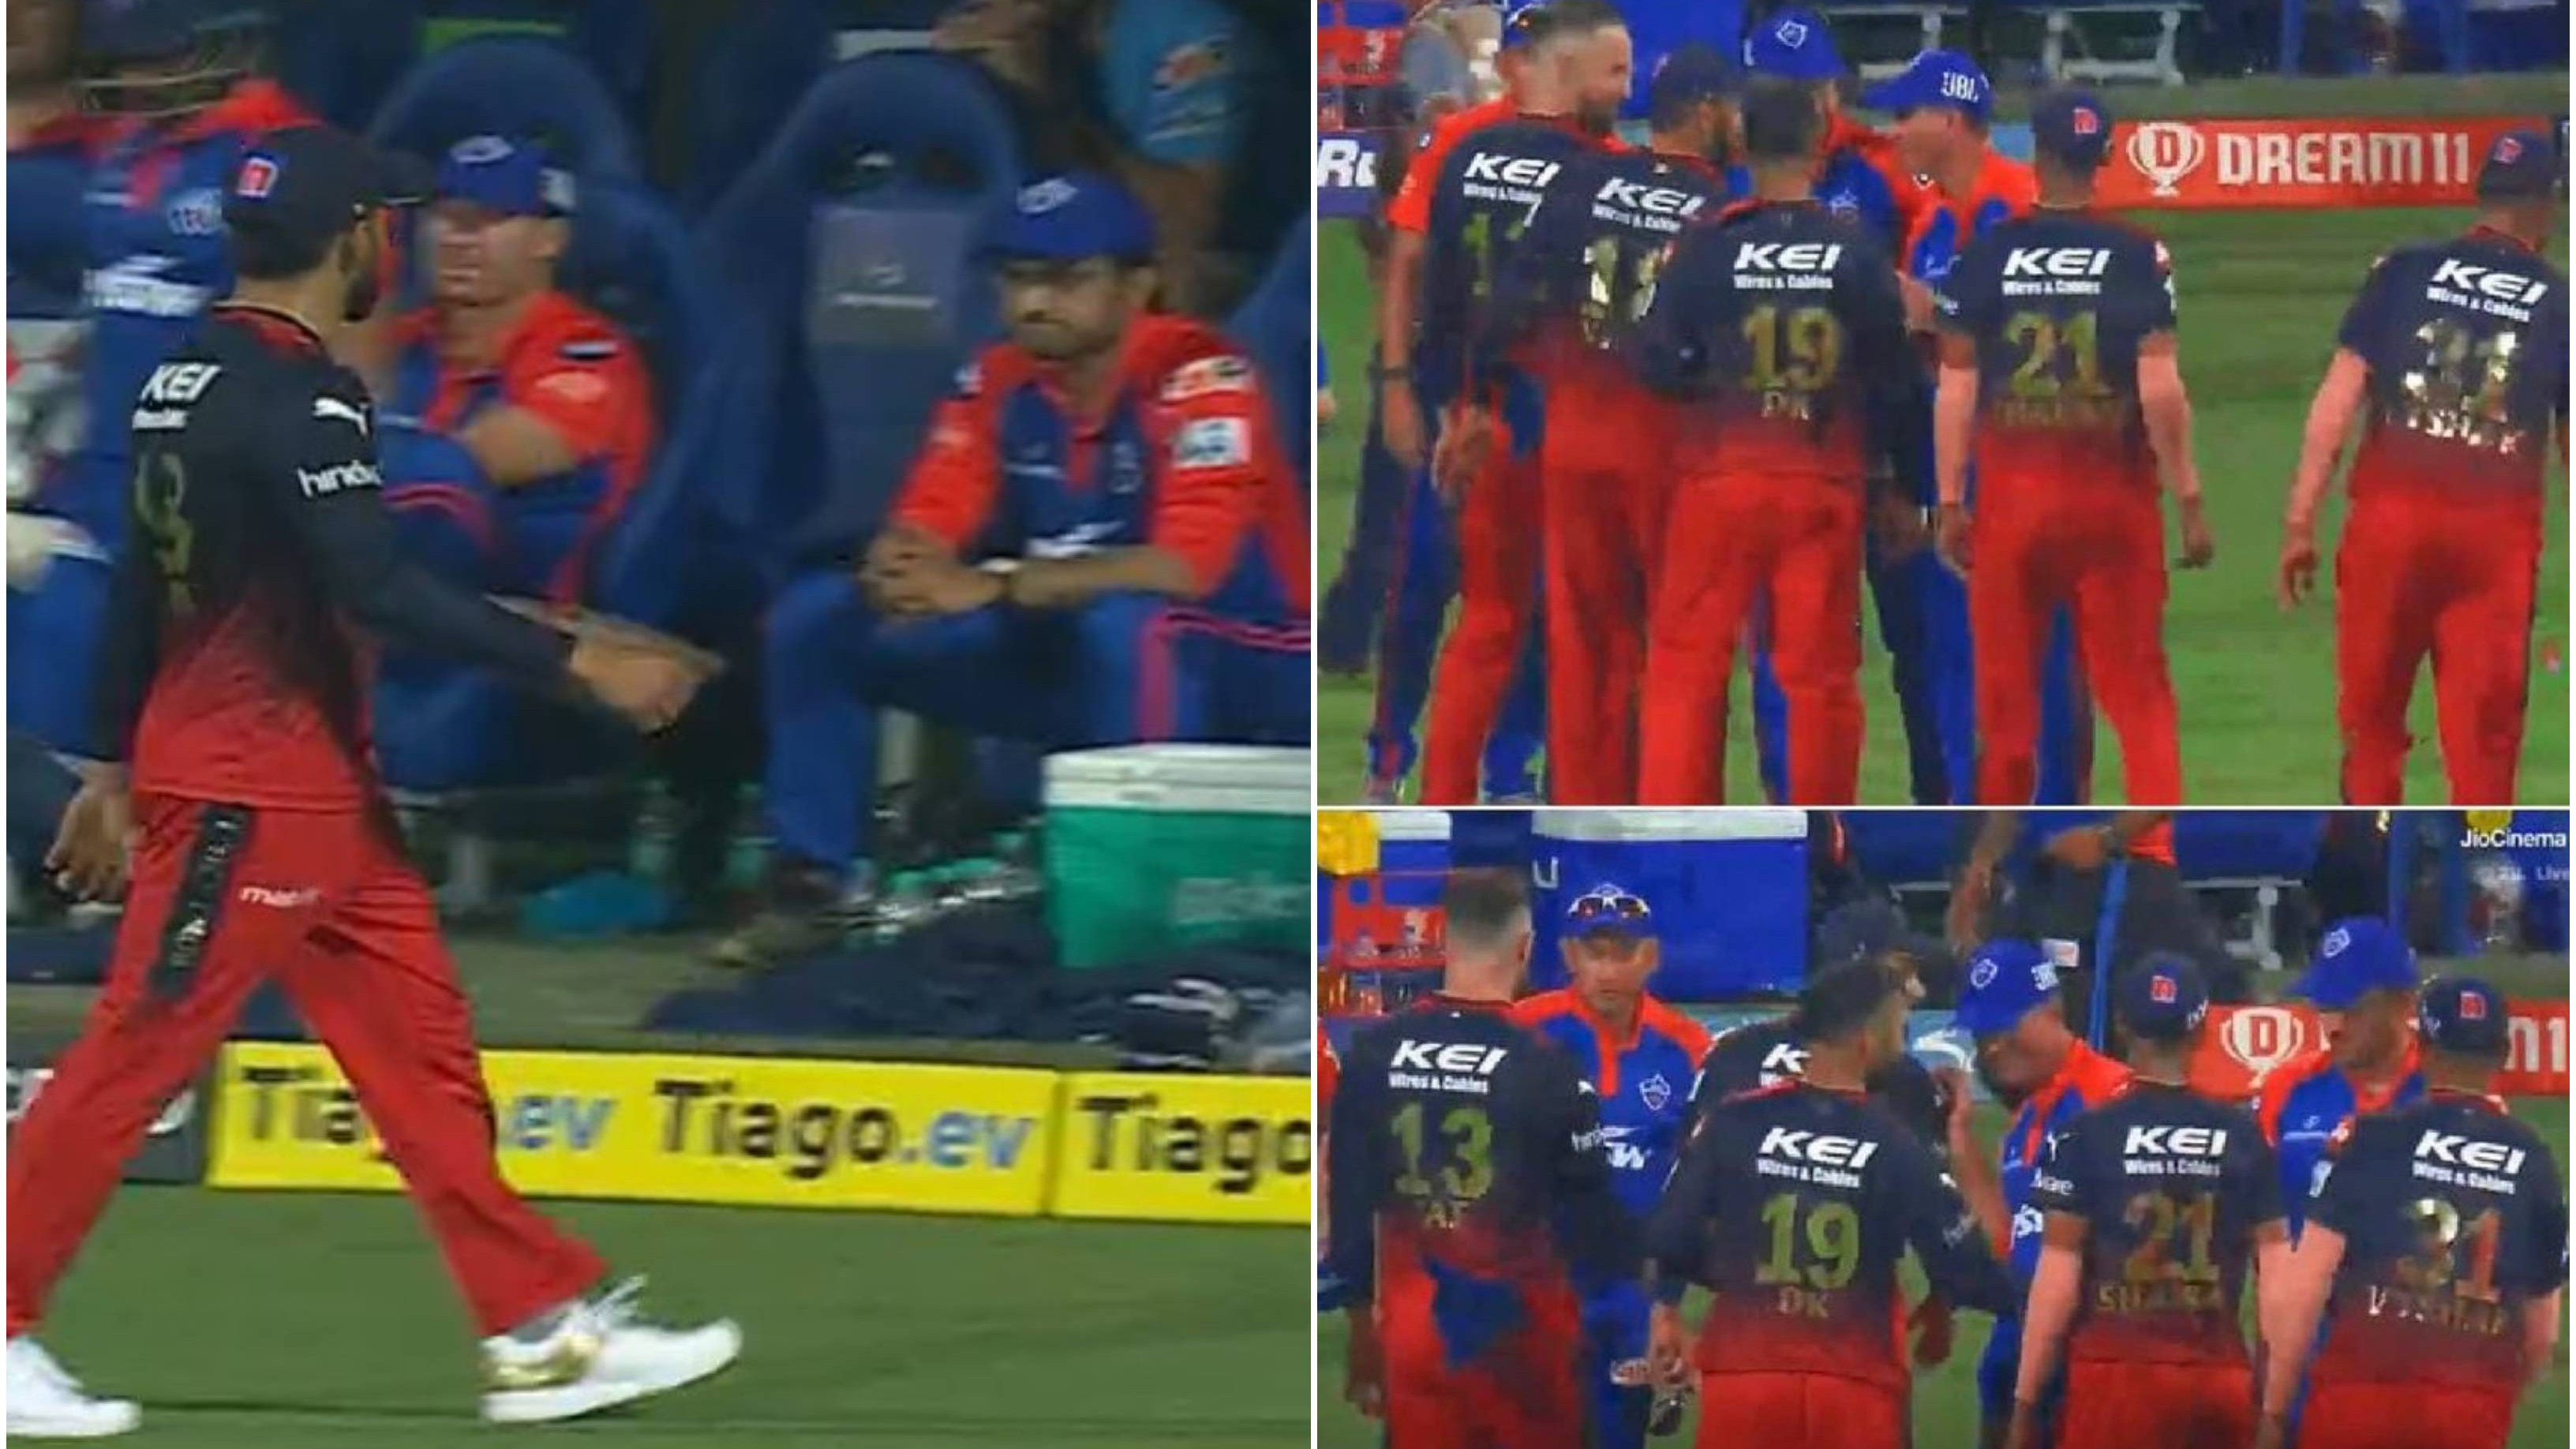 IPL 2023: WATCH – Kohli gives death stare to Ganguly; DC’s Director of Cricket jumps queue to avoid handshake with RCB batter